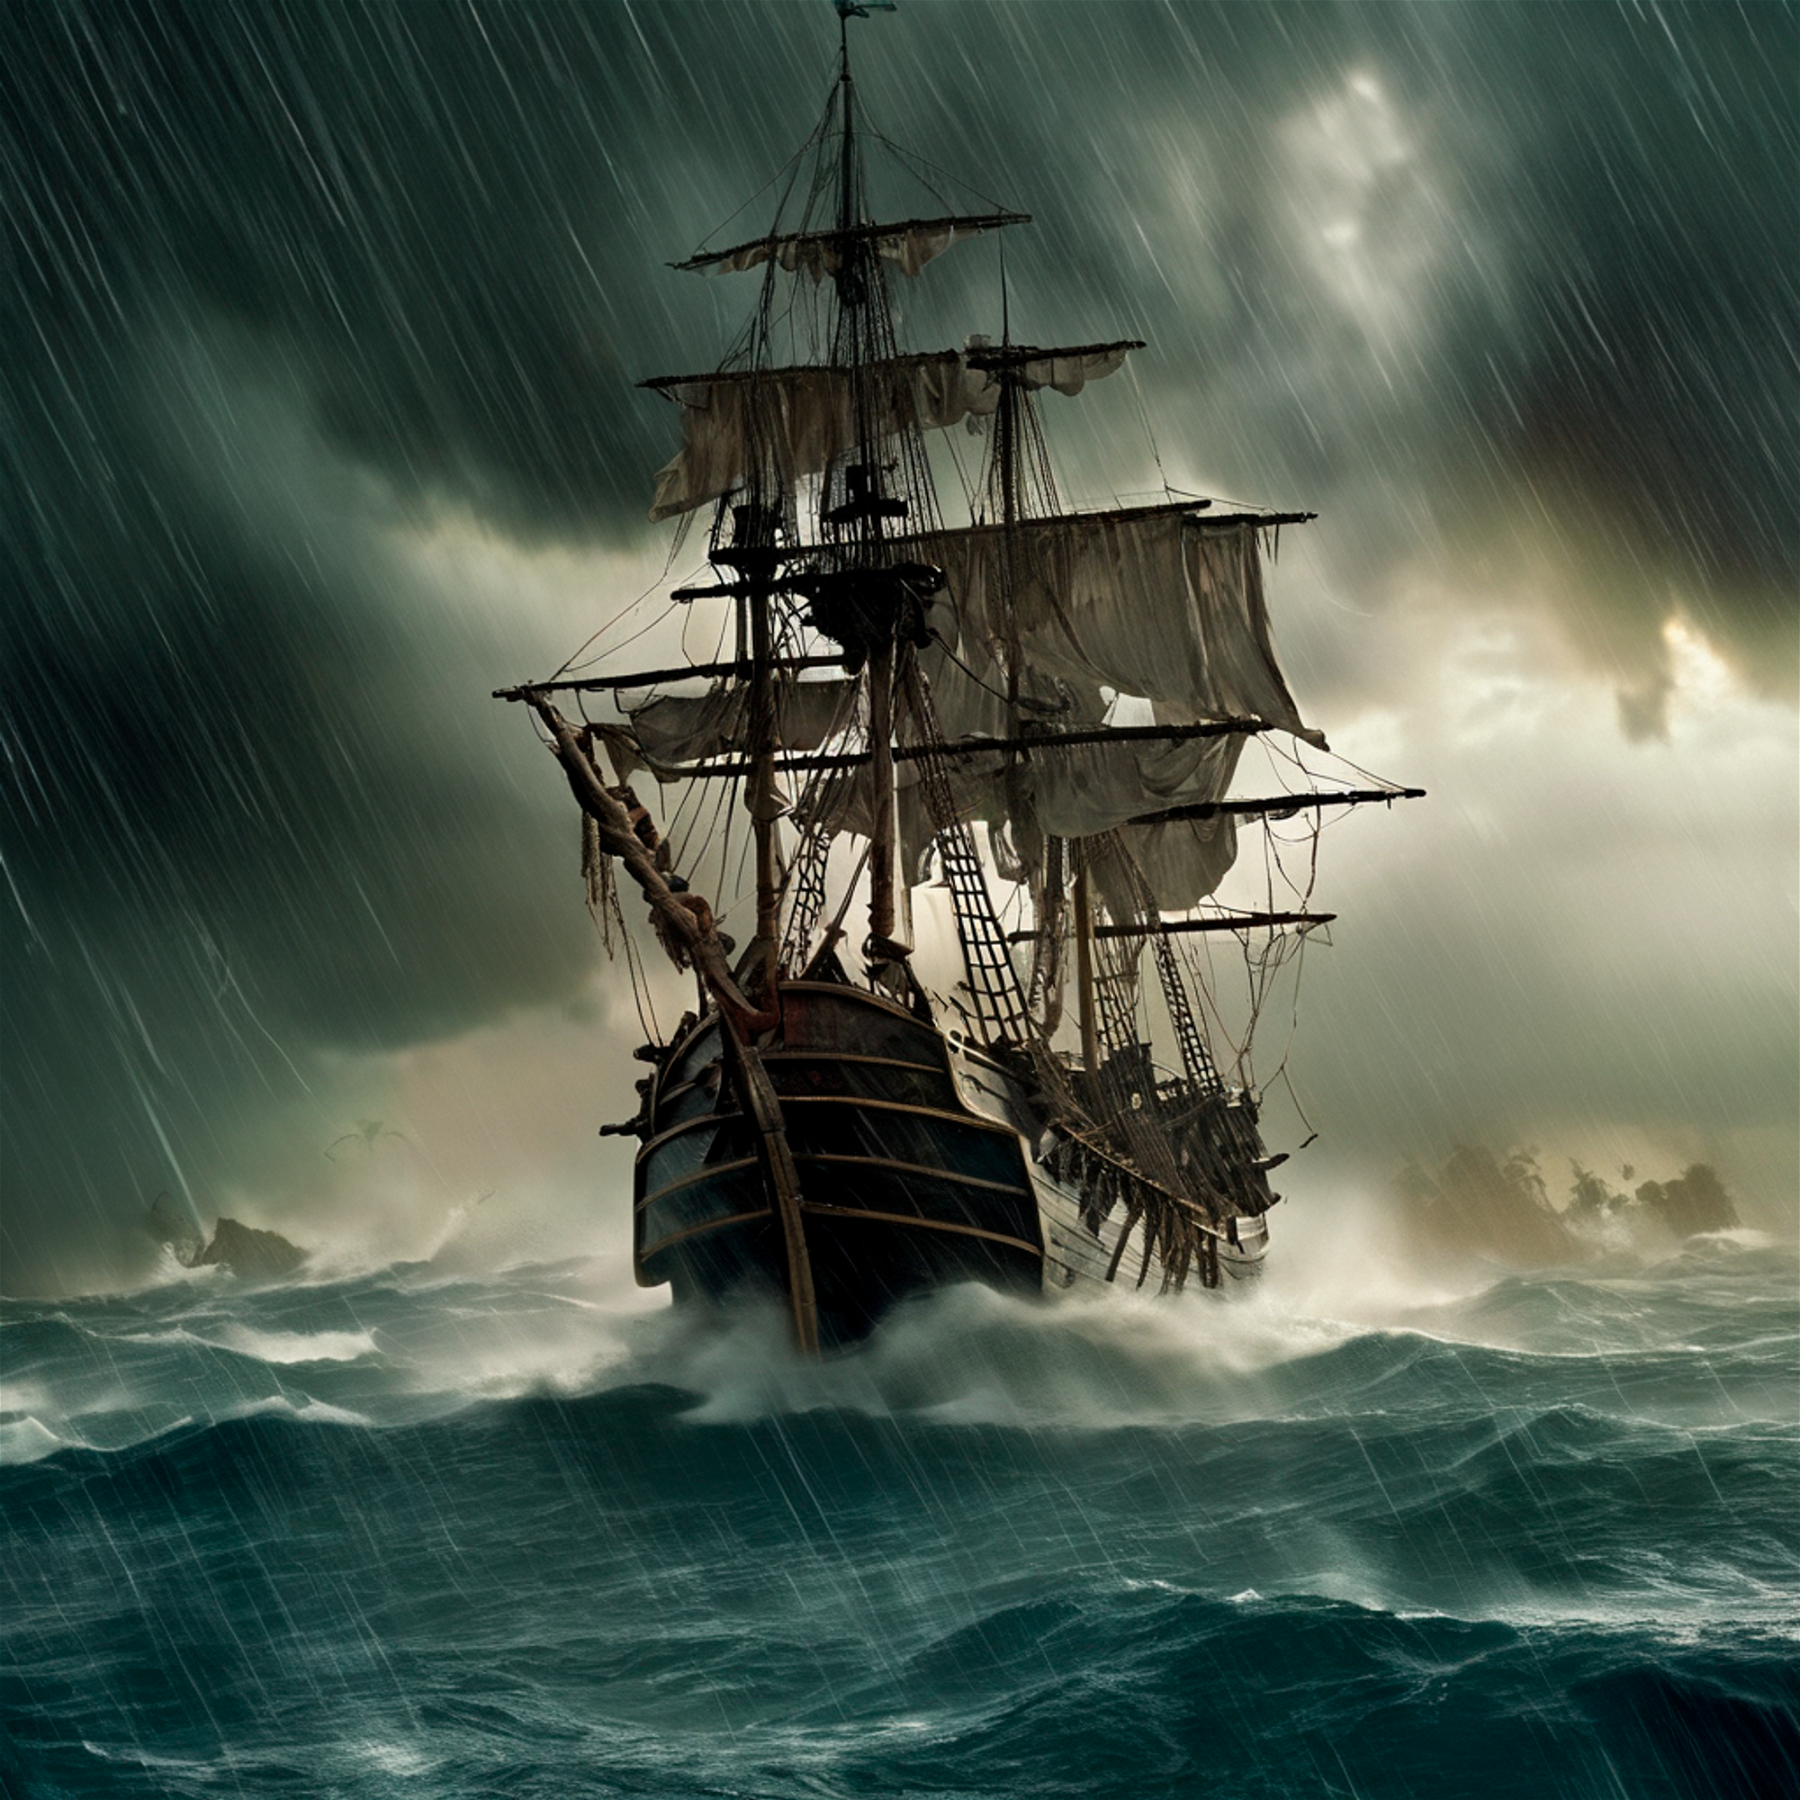 Pirate ship in a storm, pirates of the caribbean, movie still.